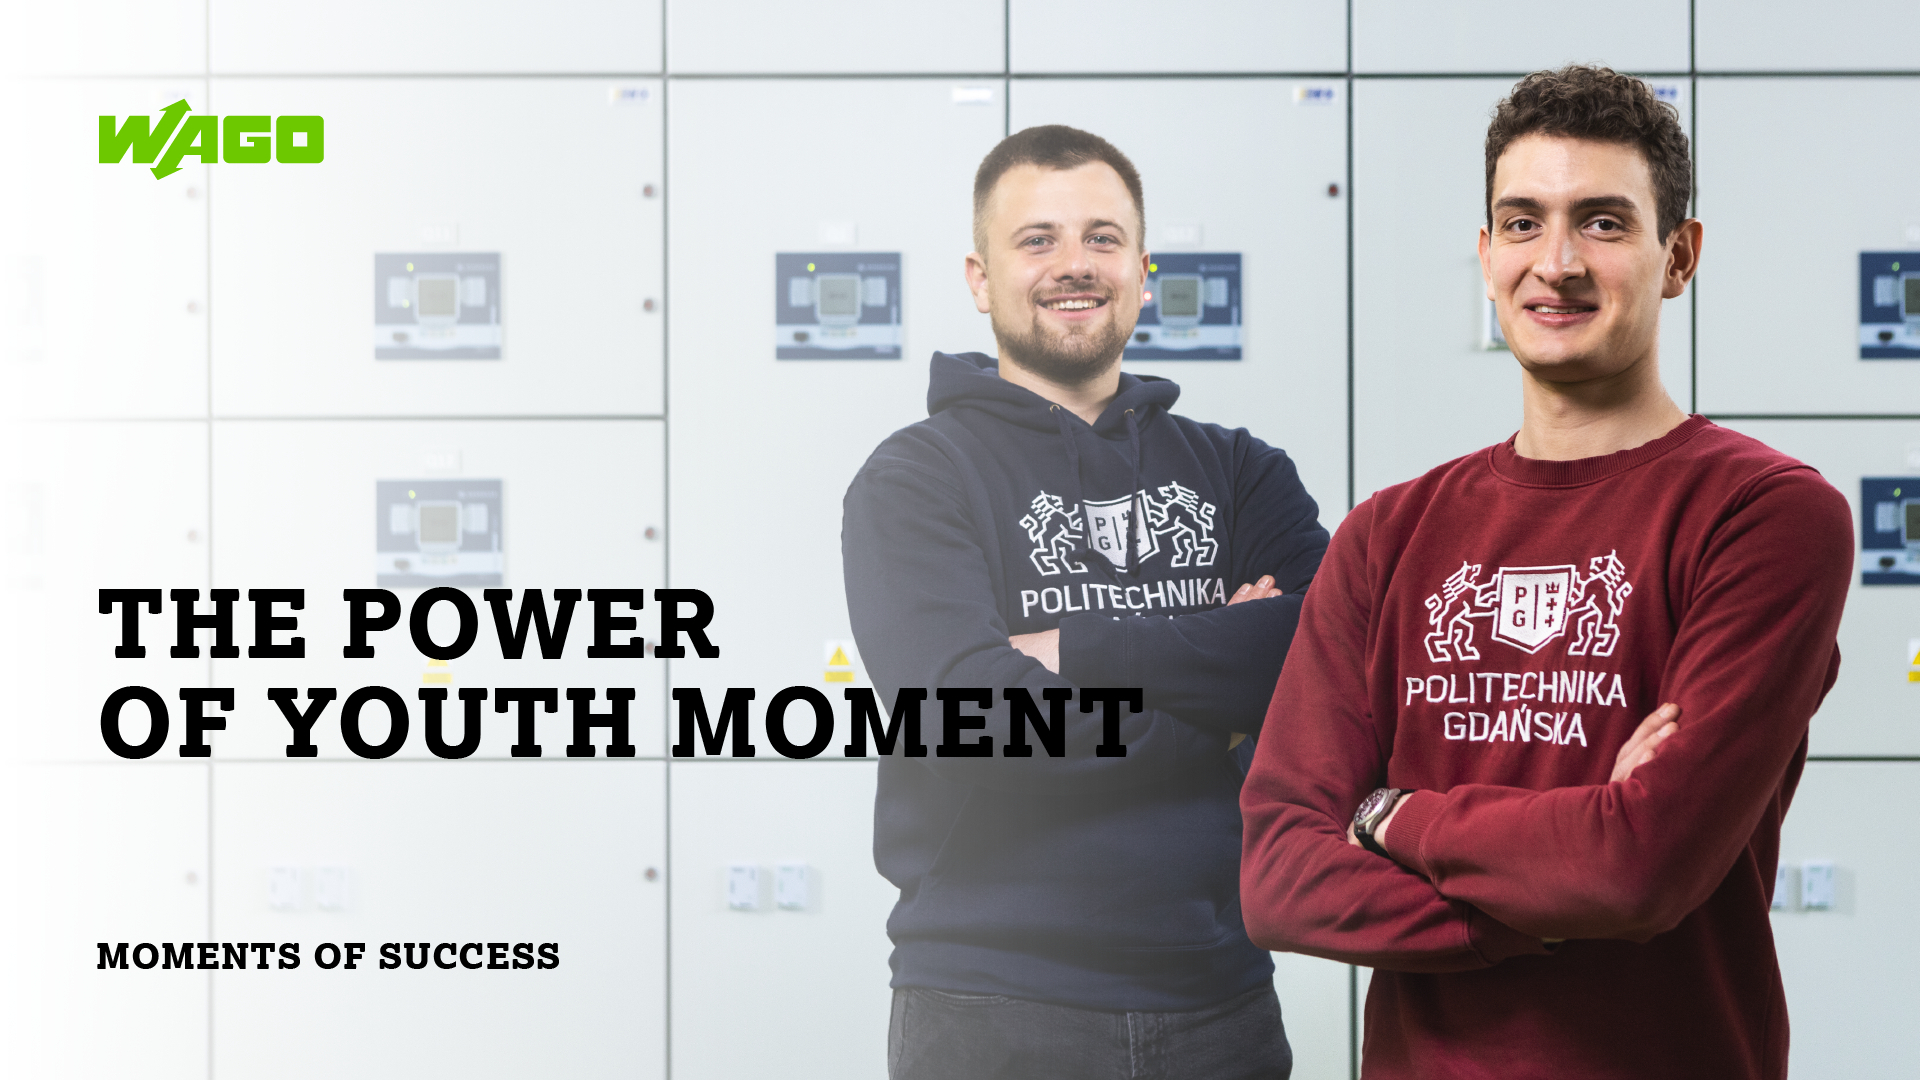 The power of youth moment